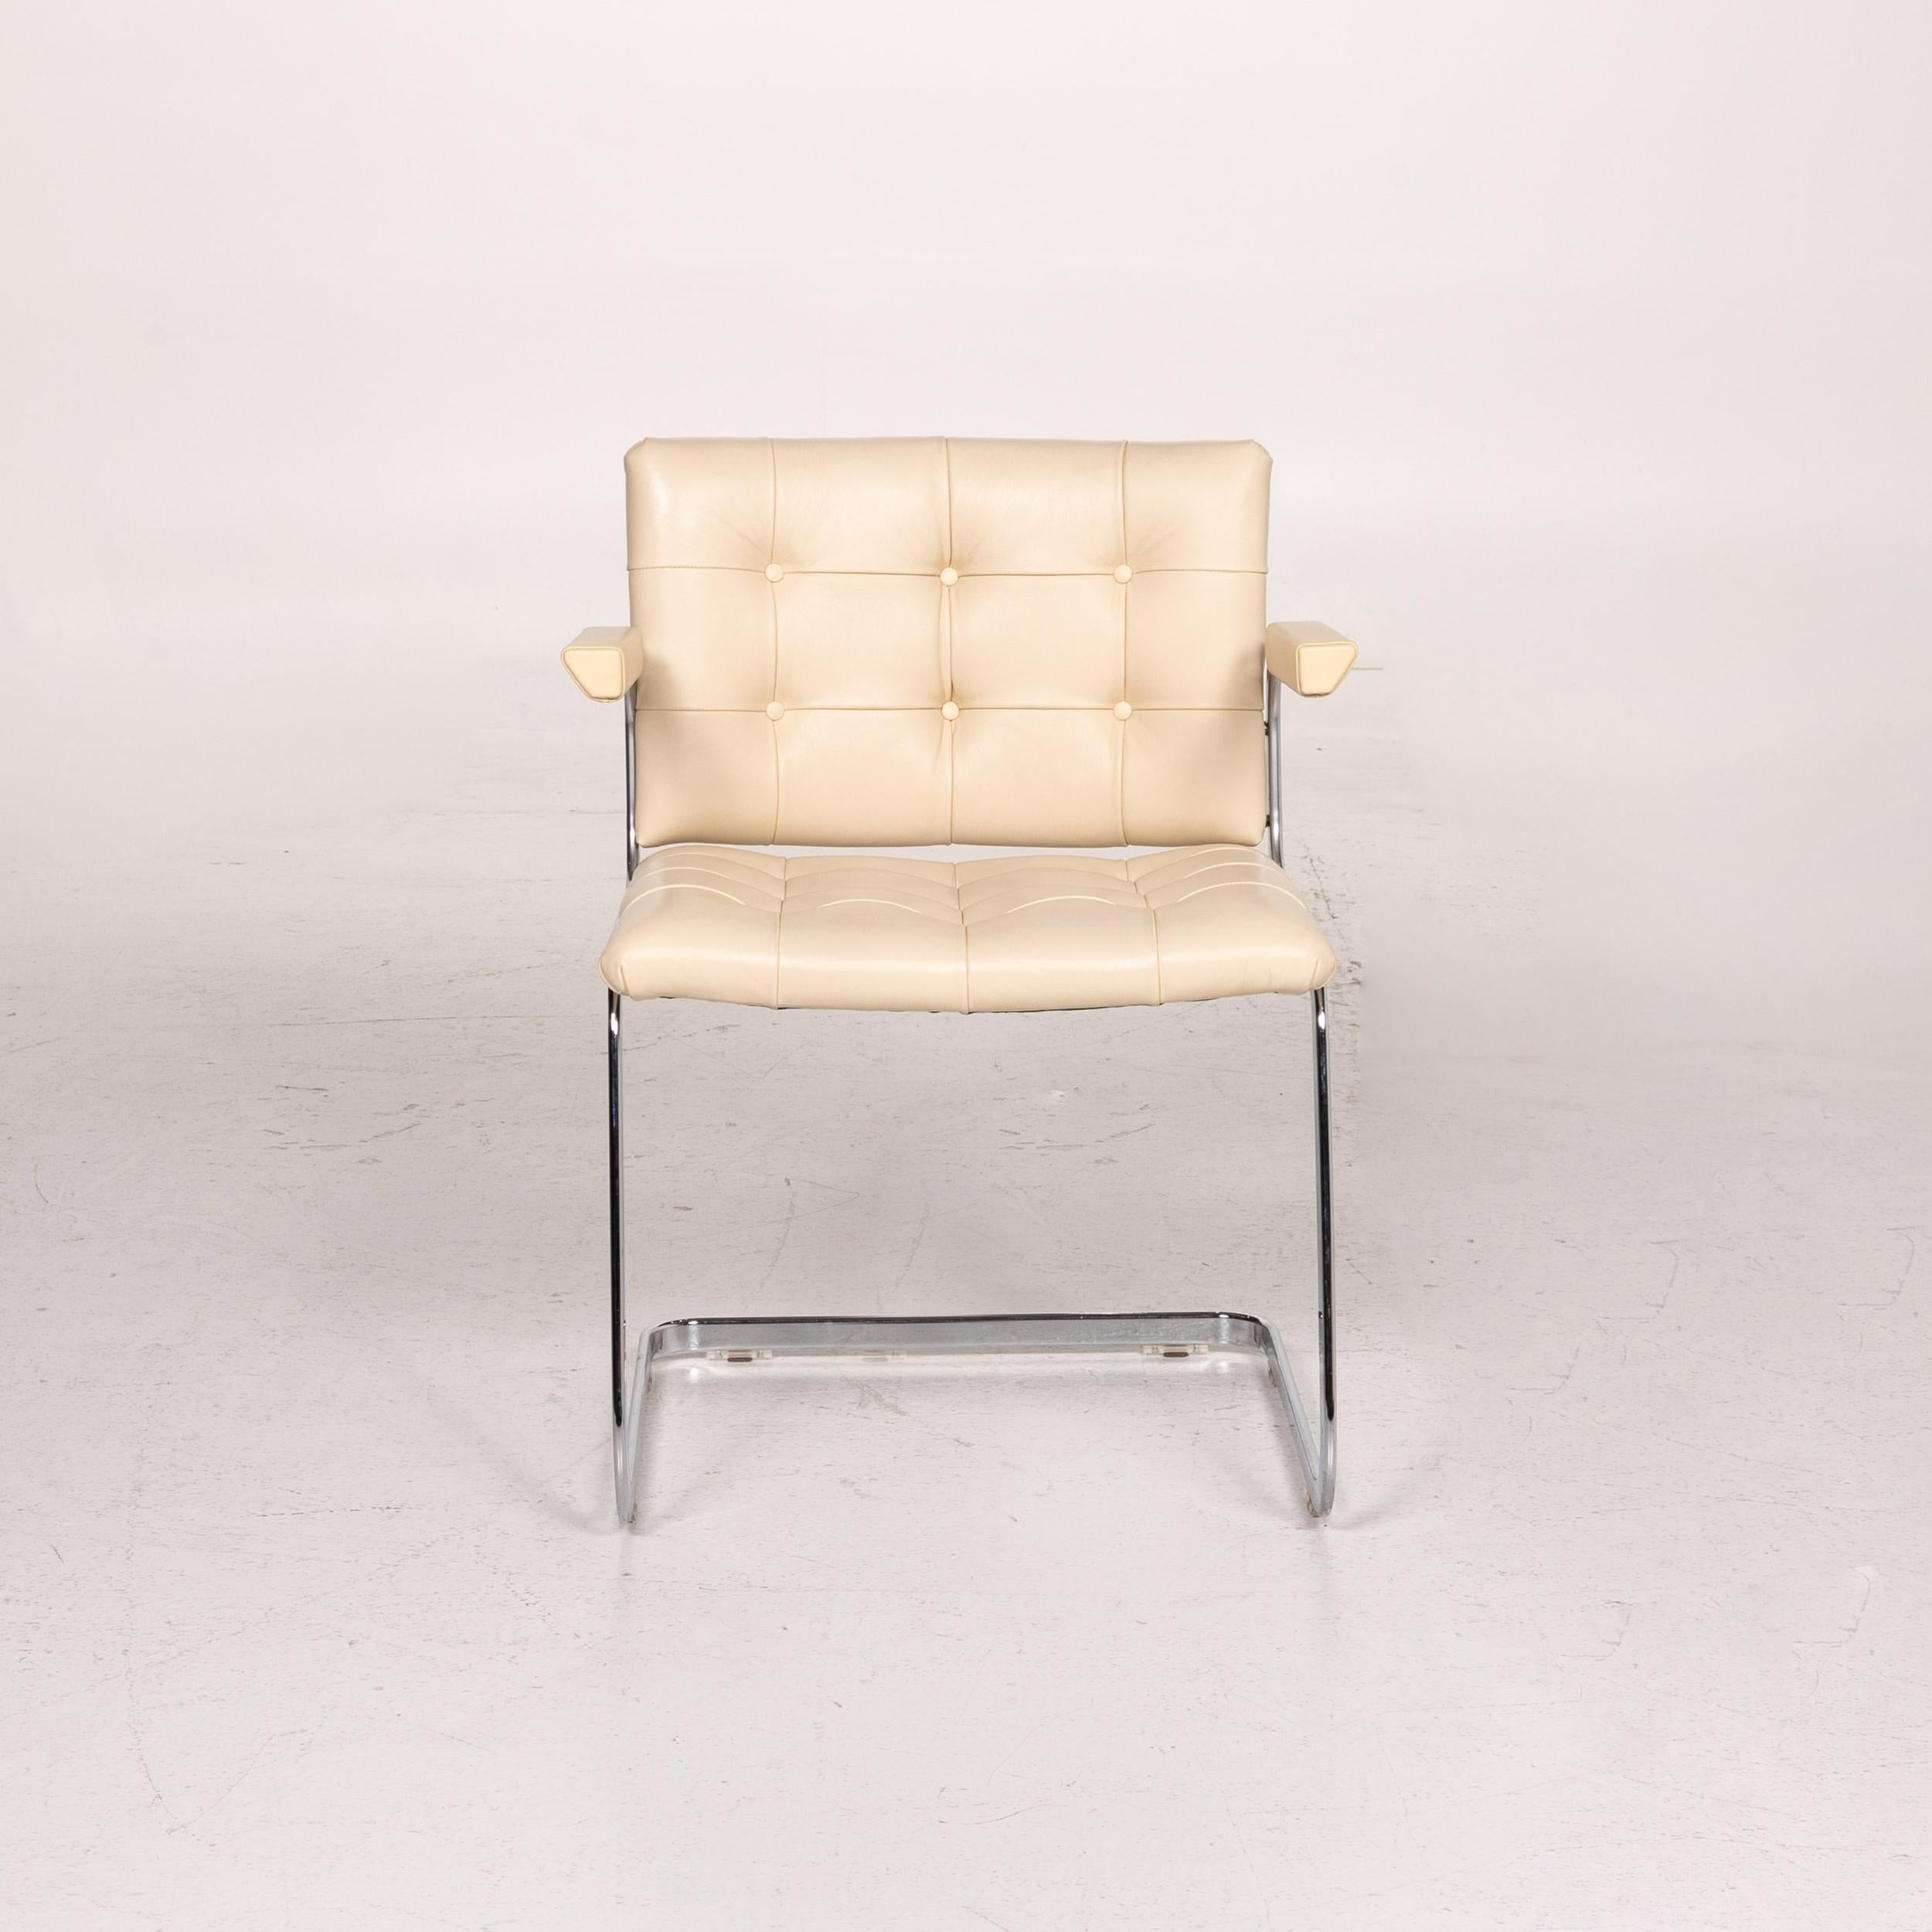 De Sede RH 305/02 Leather Chair Beige Cantilever Dining Chair In Good Condition For Sale In Cologne, DE